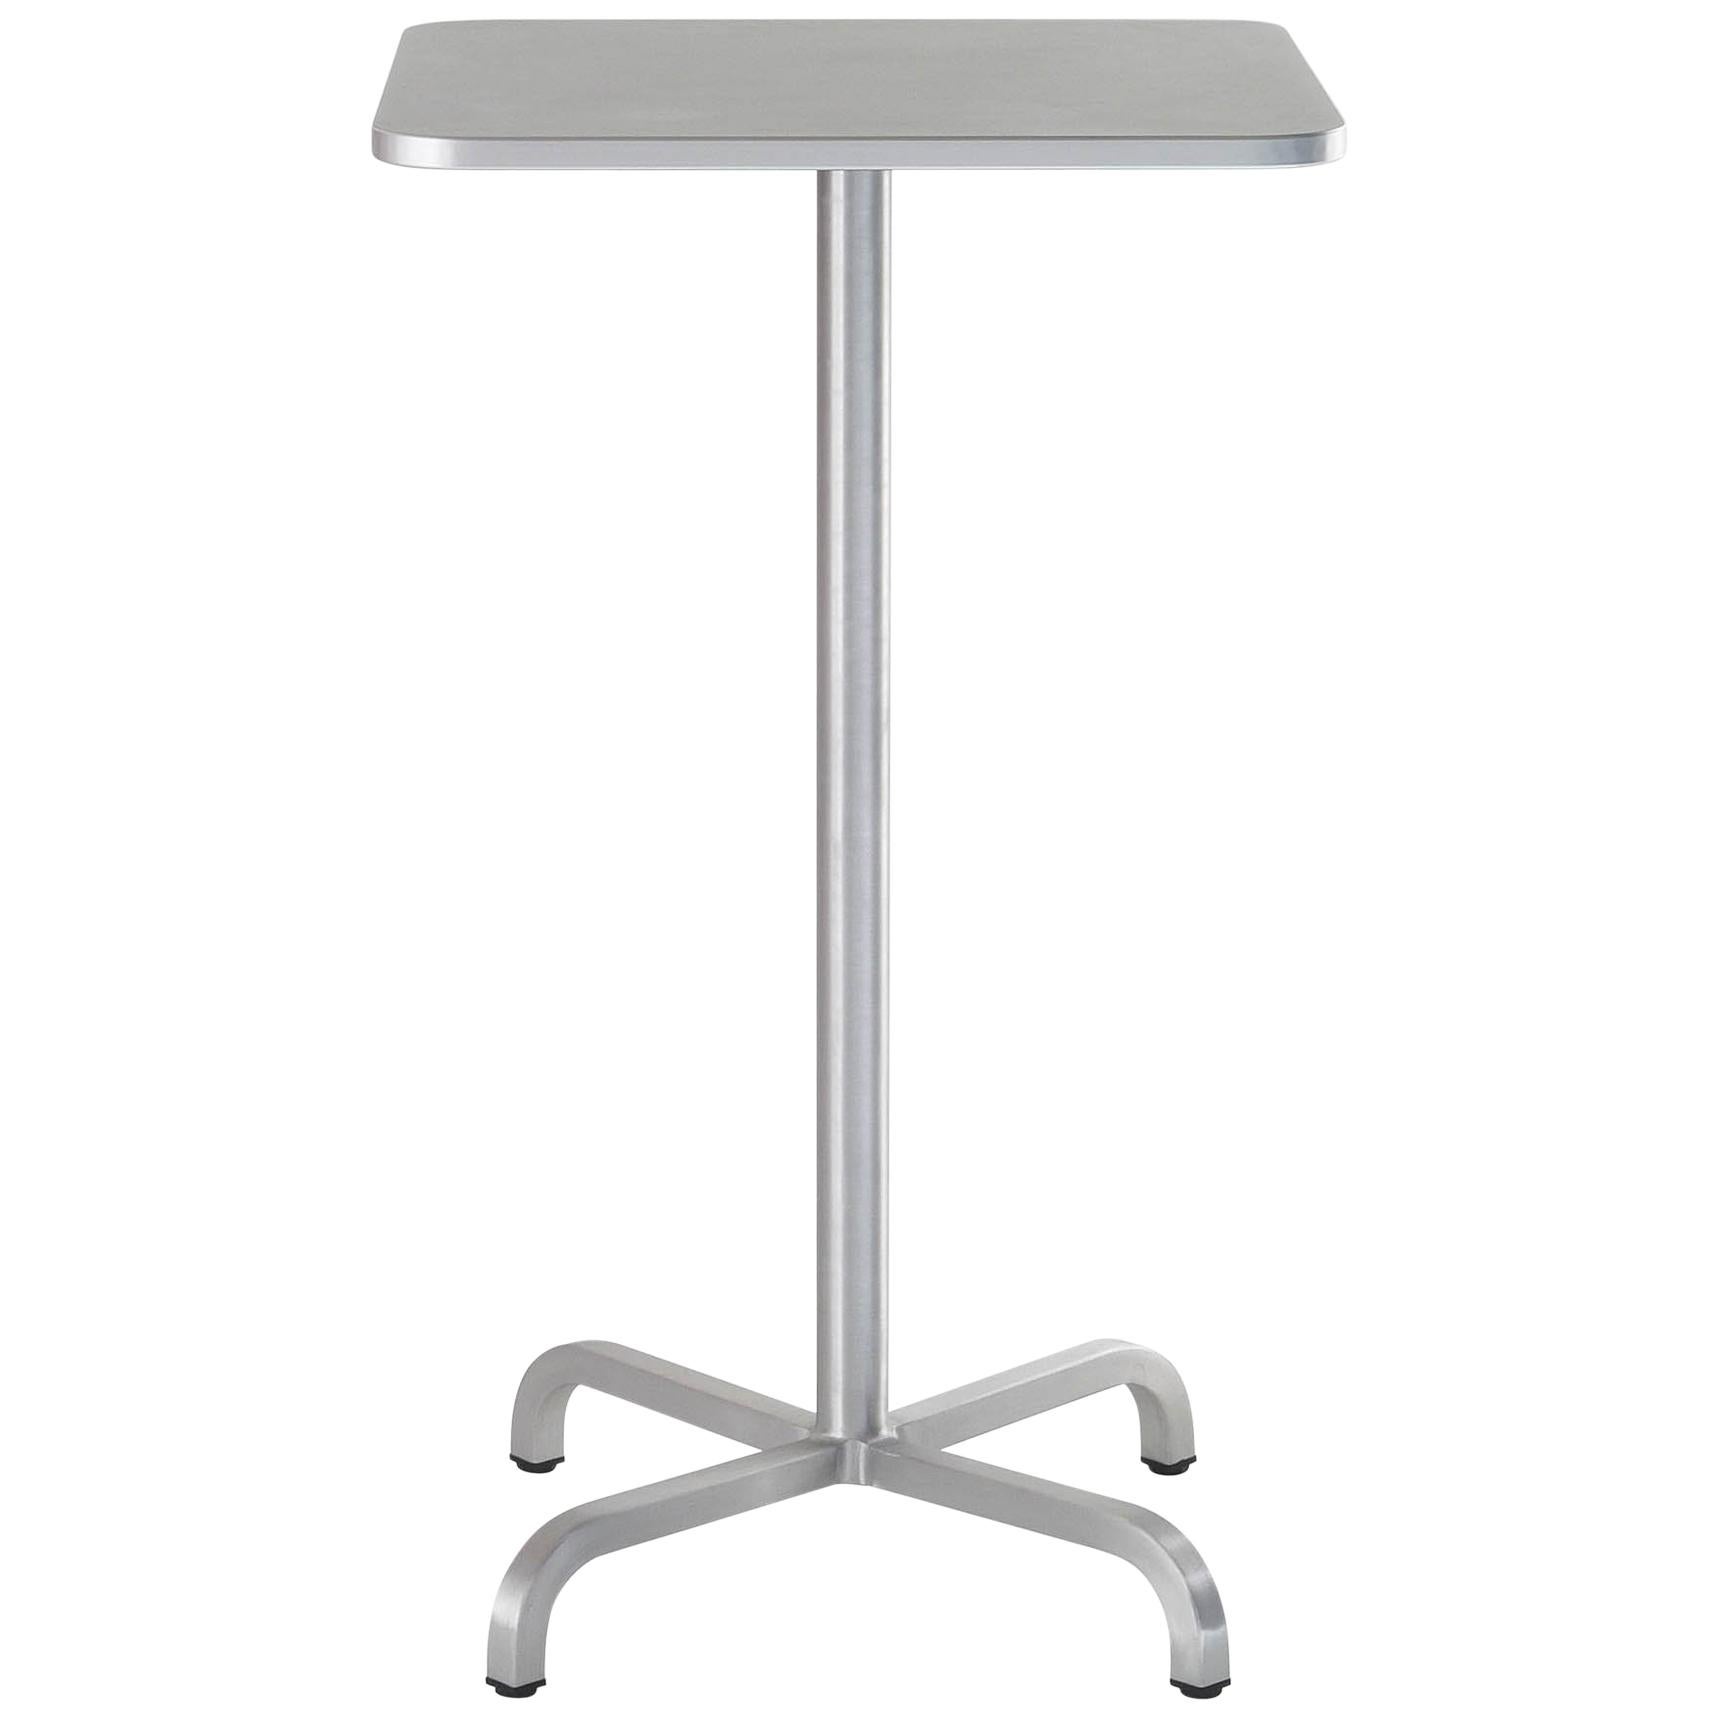 Emeco 20-06 Small Square Bar Table with Gray Laminate Top by Norman Foster For Sale